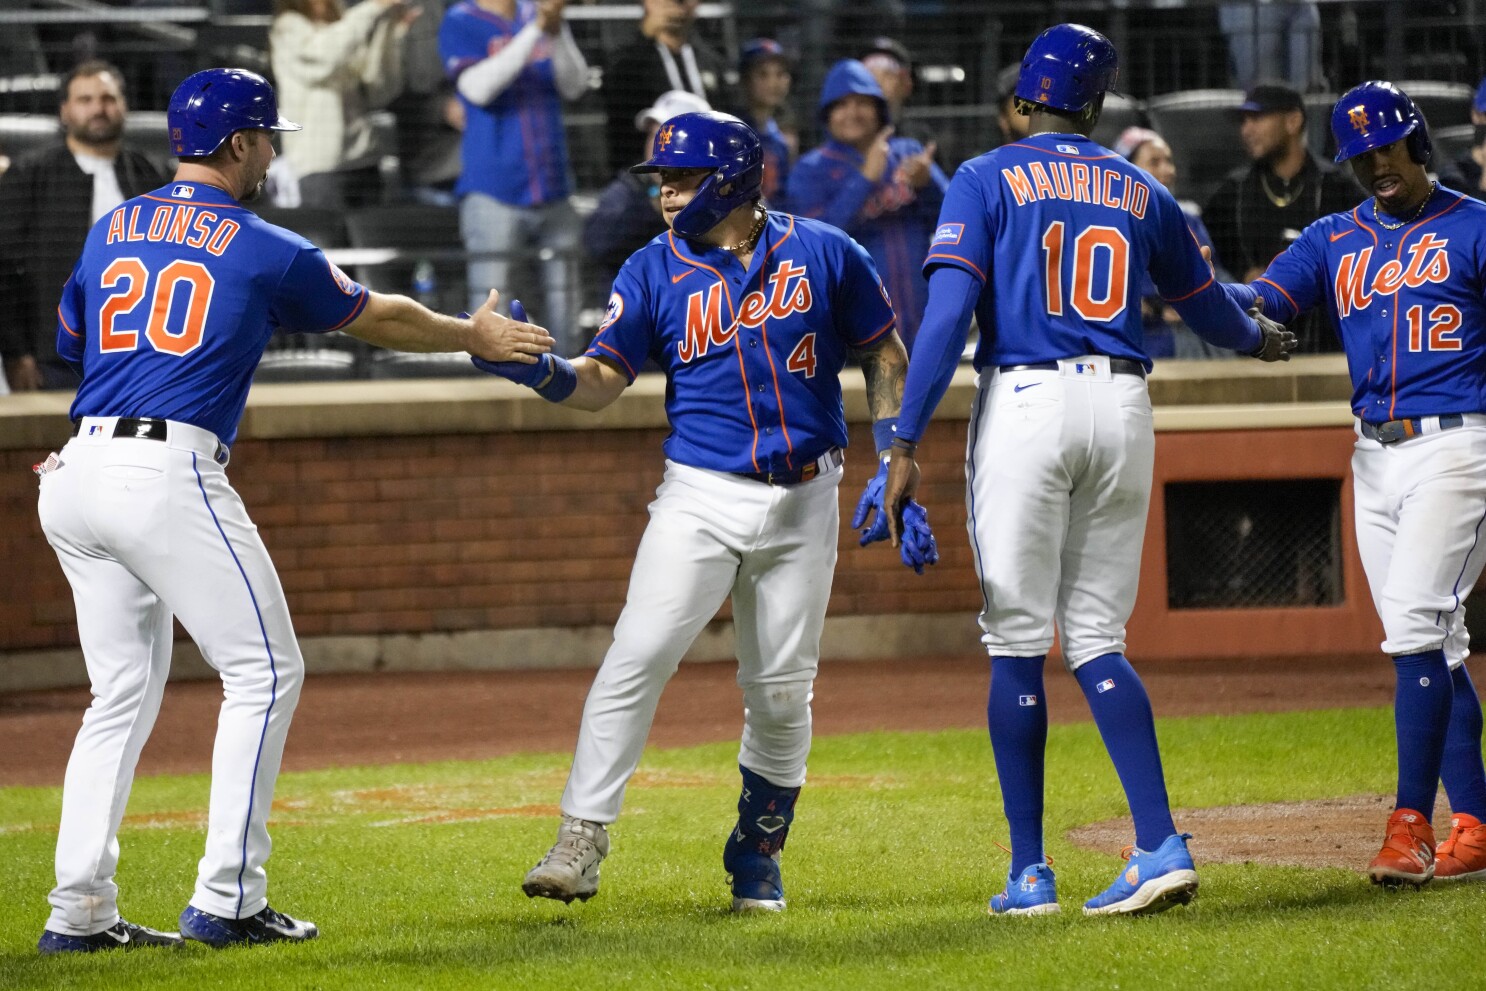 Mets rookies look to finish strong, build on MLB experience